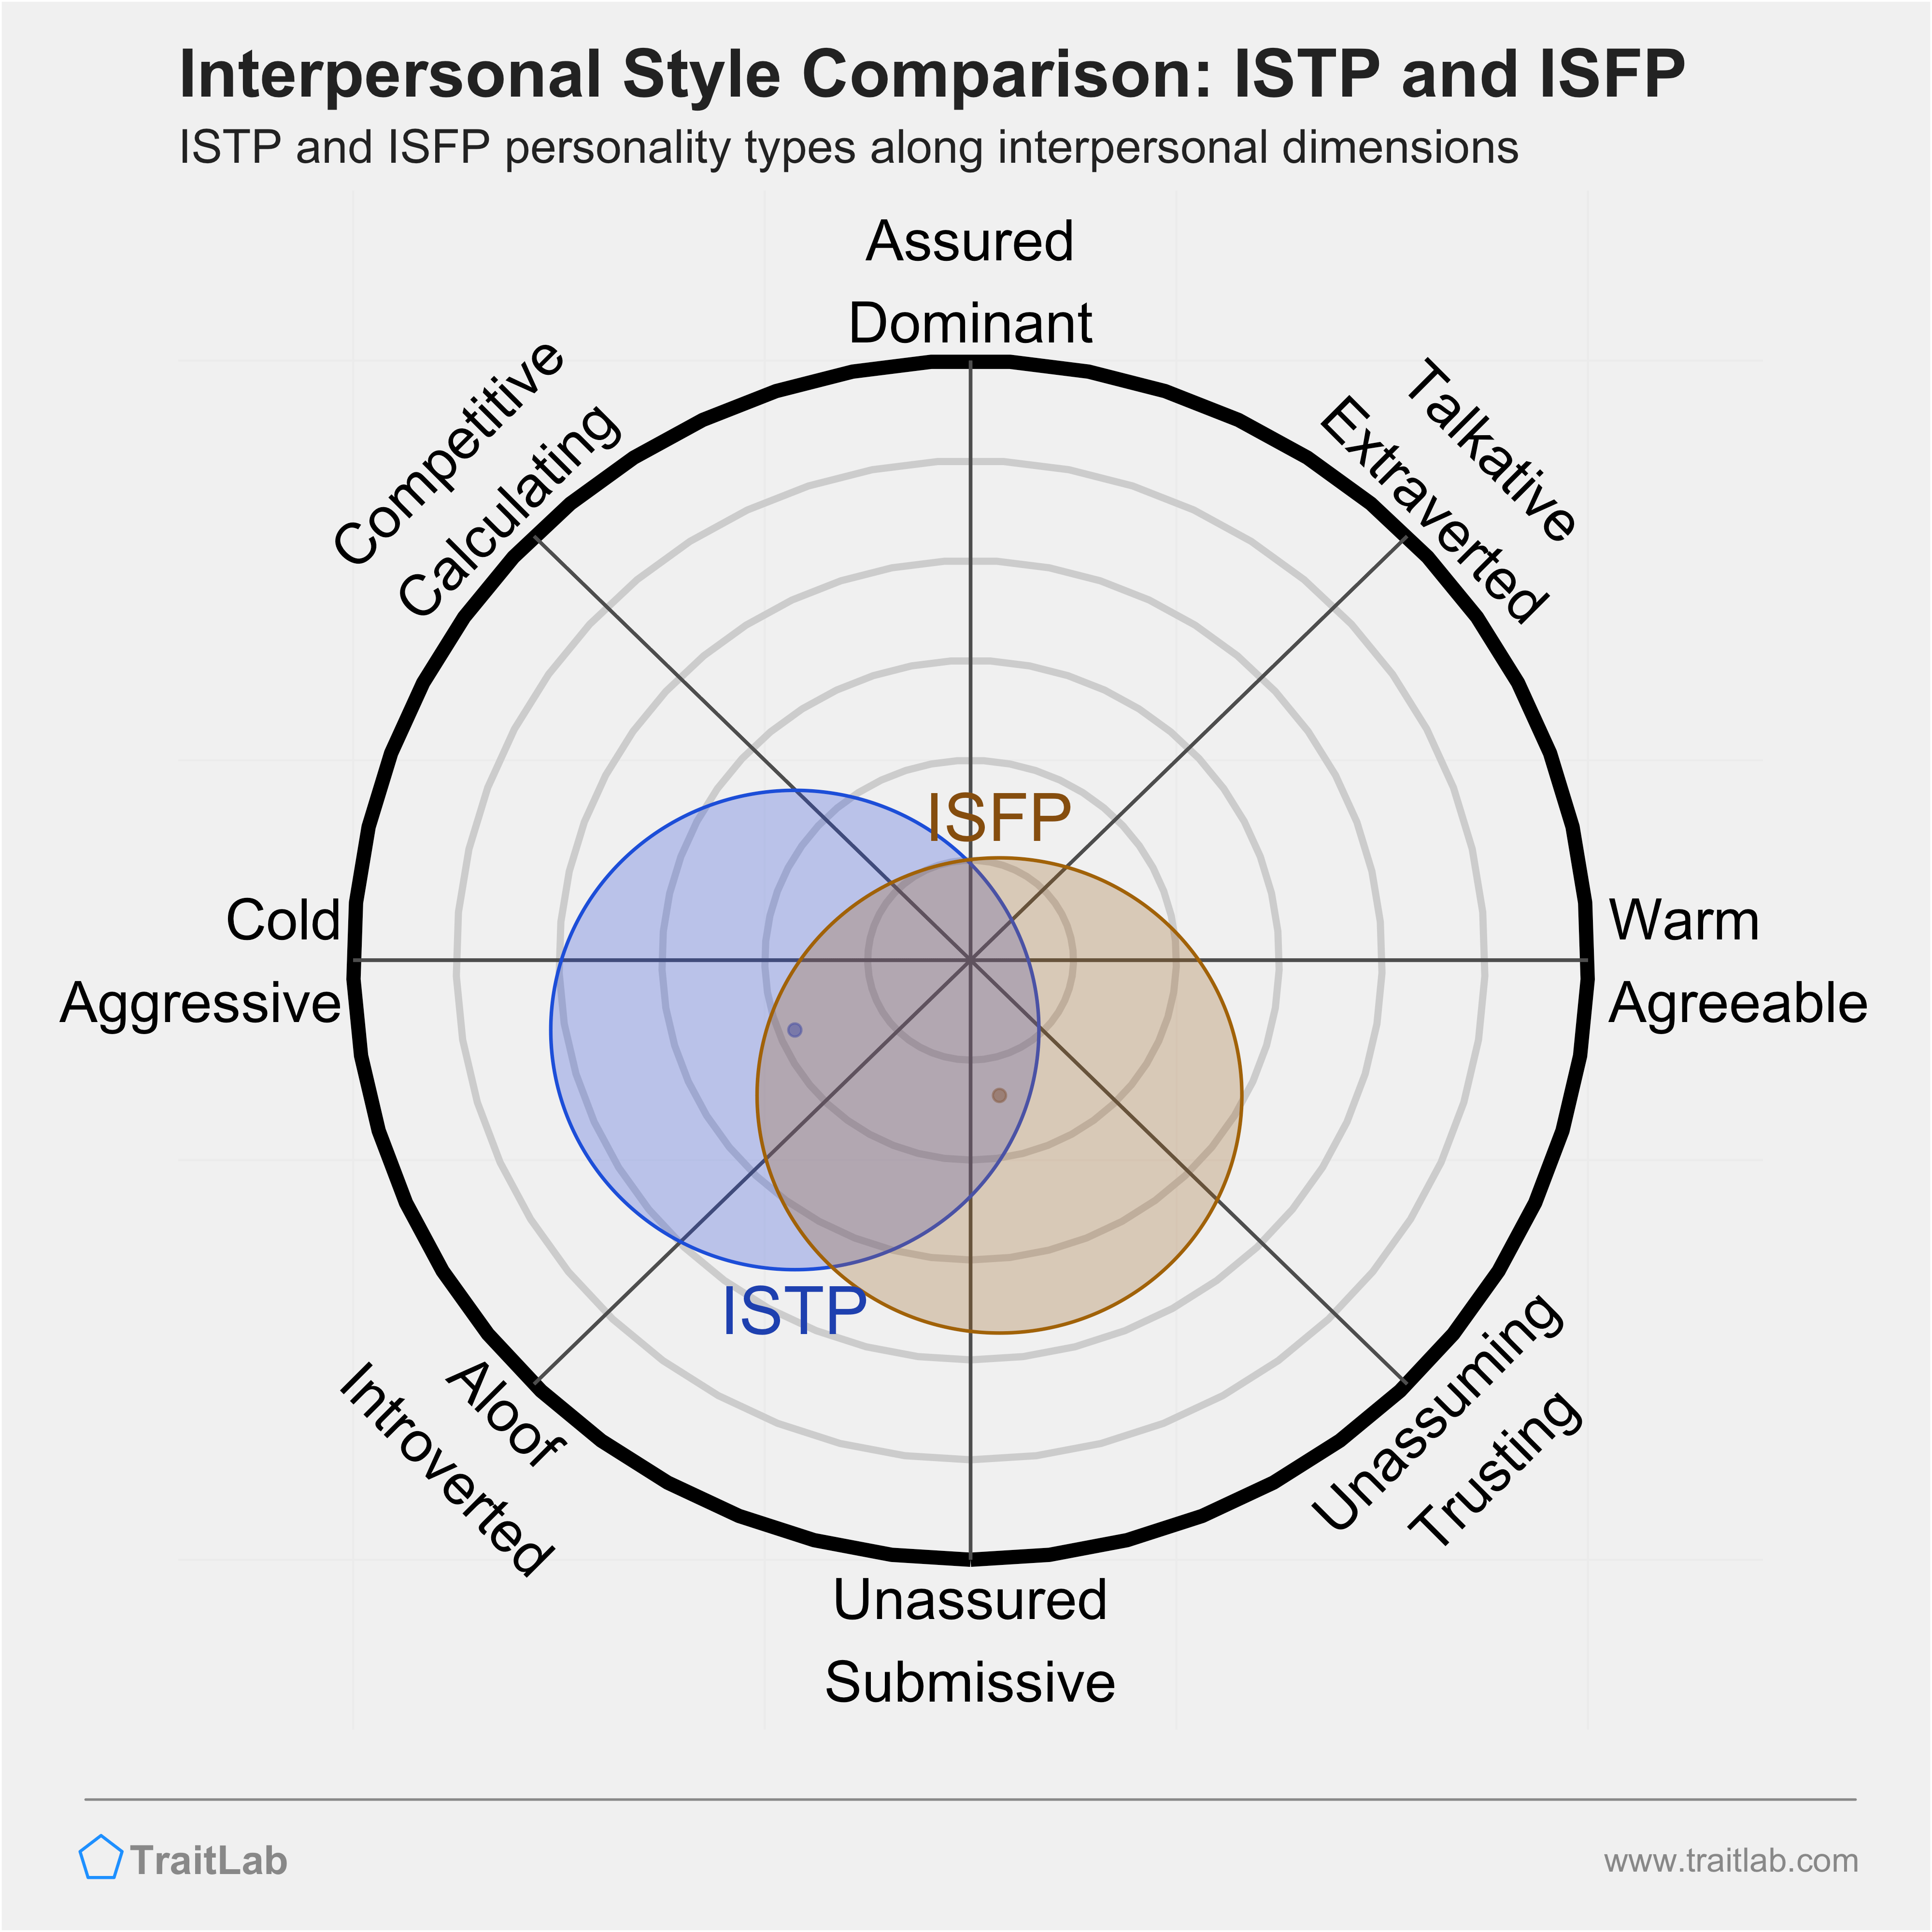 ISTP and ISFP comparison across interpersonal dimensions